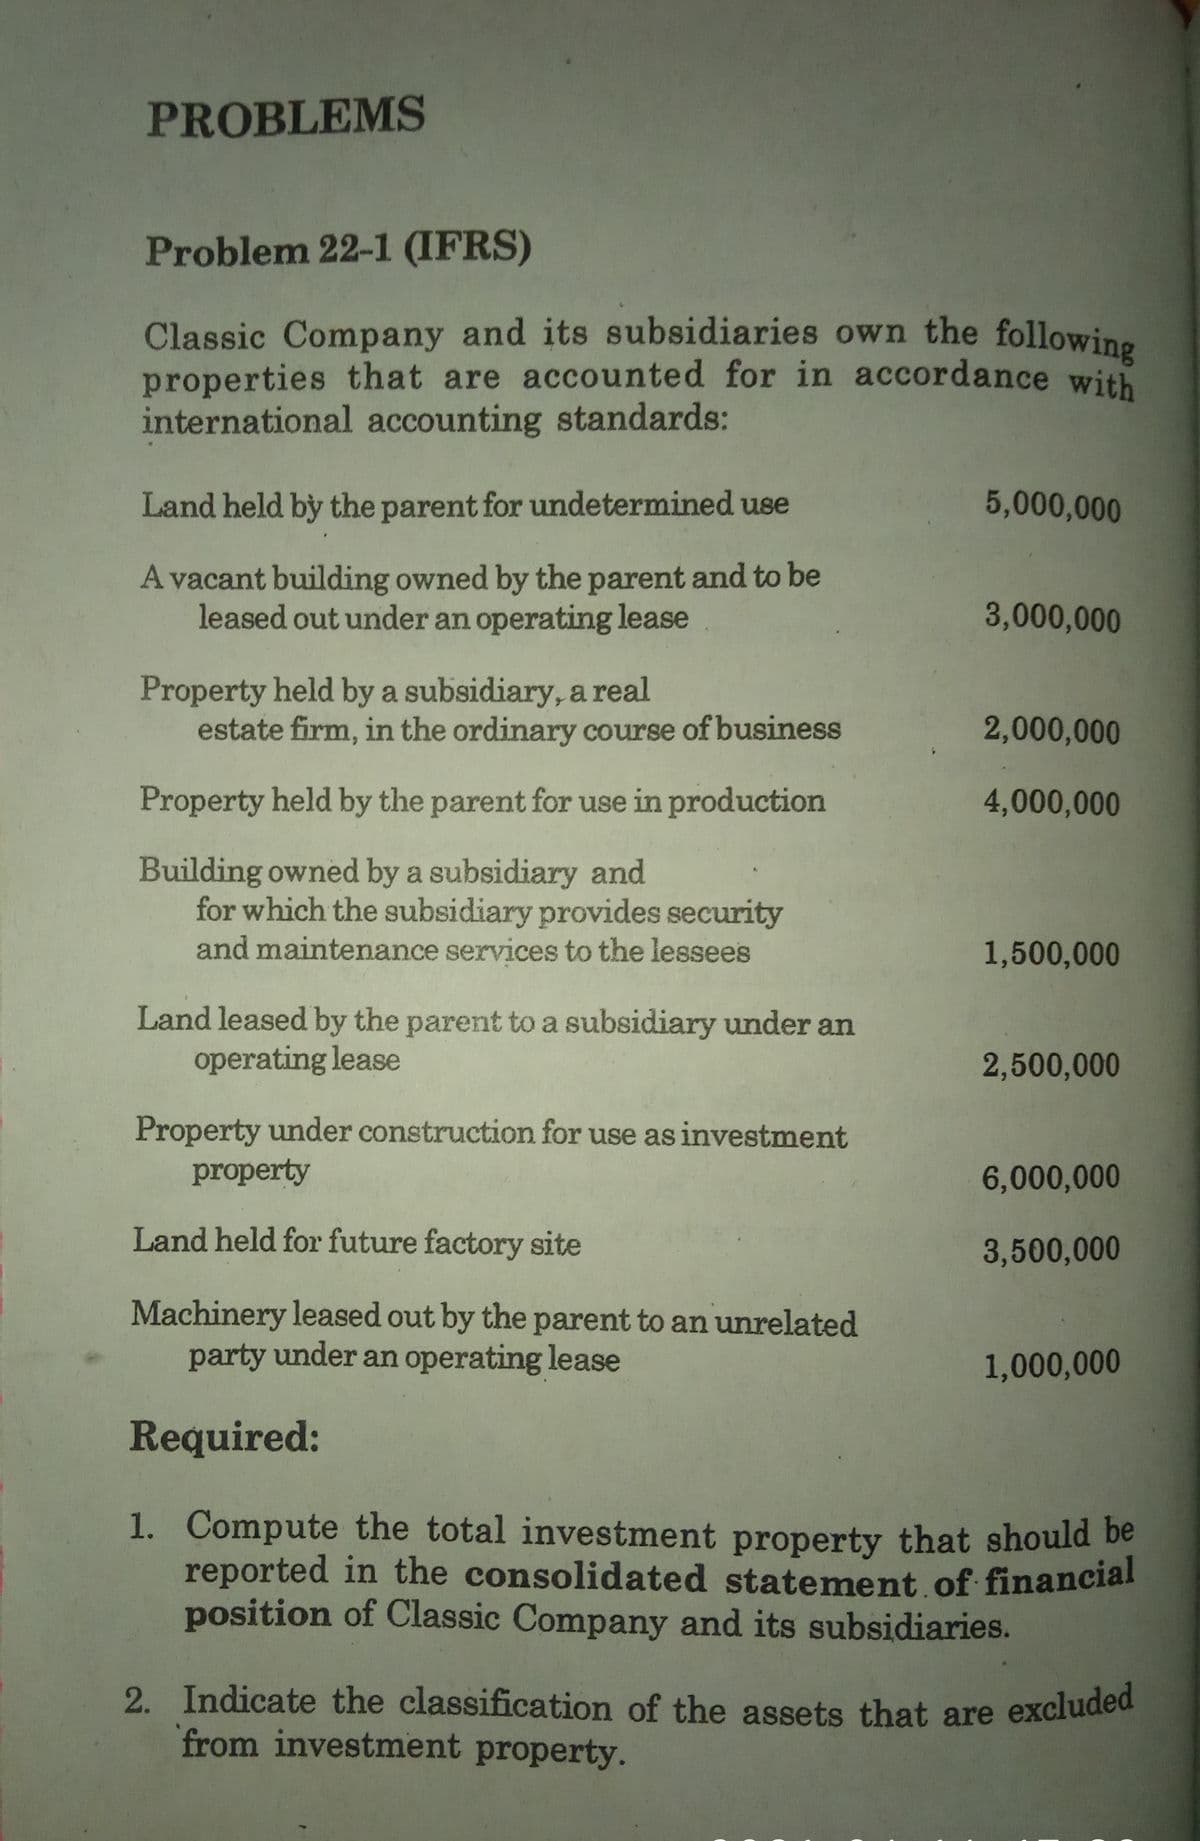 2. Indicate the classification of the assets that are excluded
PROBLEMS
Problem 22-1 (IFRS)
Classic Company and its subsidiaries own the following
properties that are accounted for in accordance with
international accounting standards:
Land held by the parent for undetermined use
5,000,000
A vacant building owned by the parent and to be
leased out under an operating lease
3,000,000
Property held by a subsidiary, a real
estate firm, in the ordinary course of business
2,000,000
Property held by the parent for use in production
4,000,000
Building owned by a subsidiary and
for which the subsidiary provides security
and maintenance services to the lessees
1,500,000
Land leased by the parent to a subsidiary under an
operating lease
2,500,000
Property under construction for use as investment
property
6,000,000
Land held for future factory site
3,500,000
Machinery leased out by the parent to an unrelated
party under an operating lease
1,000,000
Required:
1. Compute the total investment property that should be
reported in the consolidated statement of financial
position of Classic Company and its subsidiaries.
from investment property.
